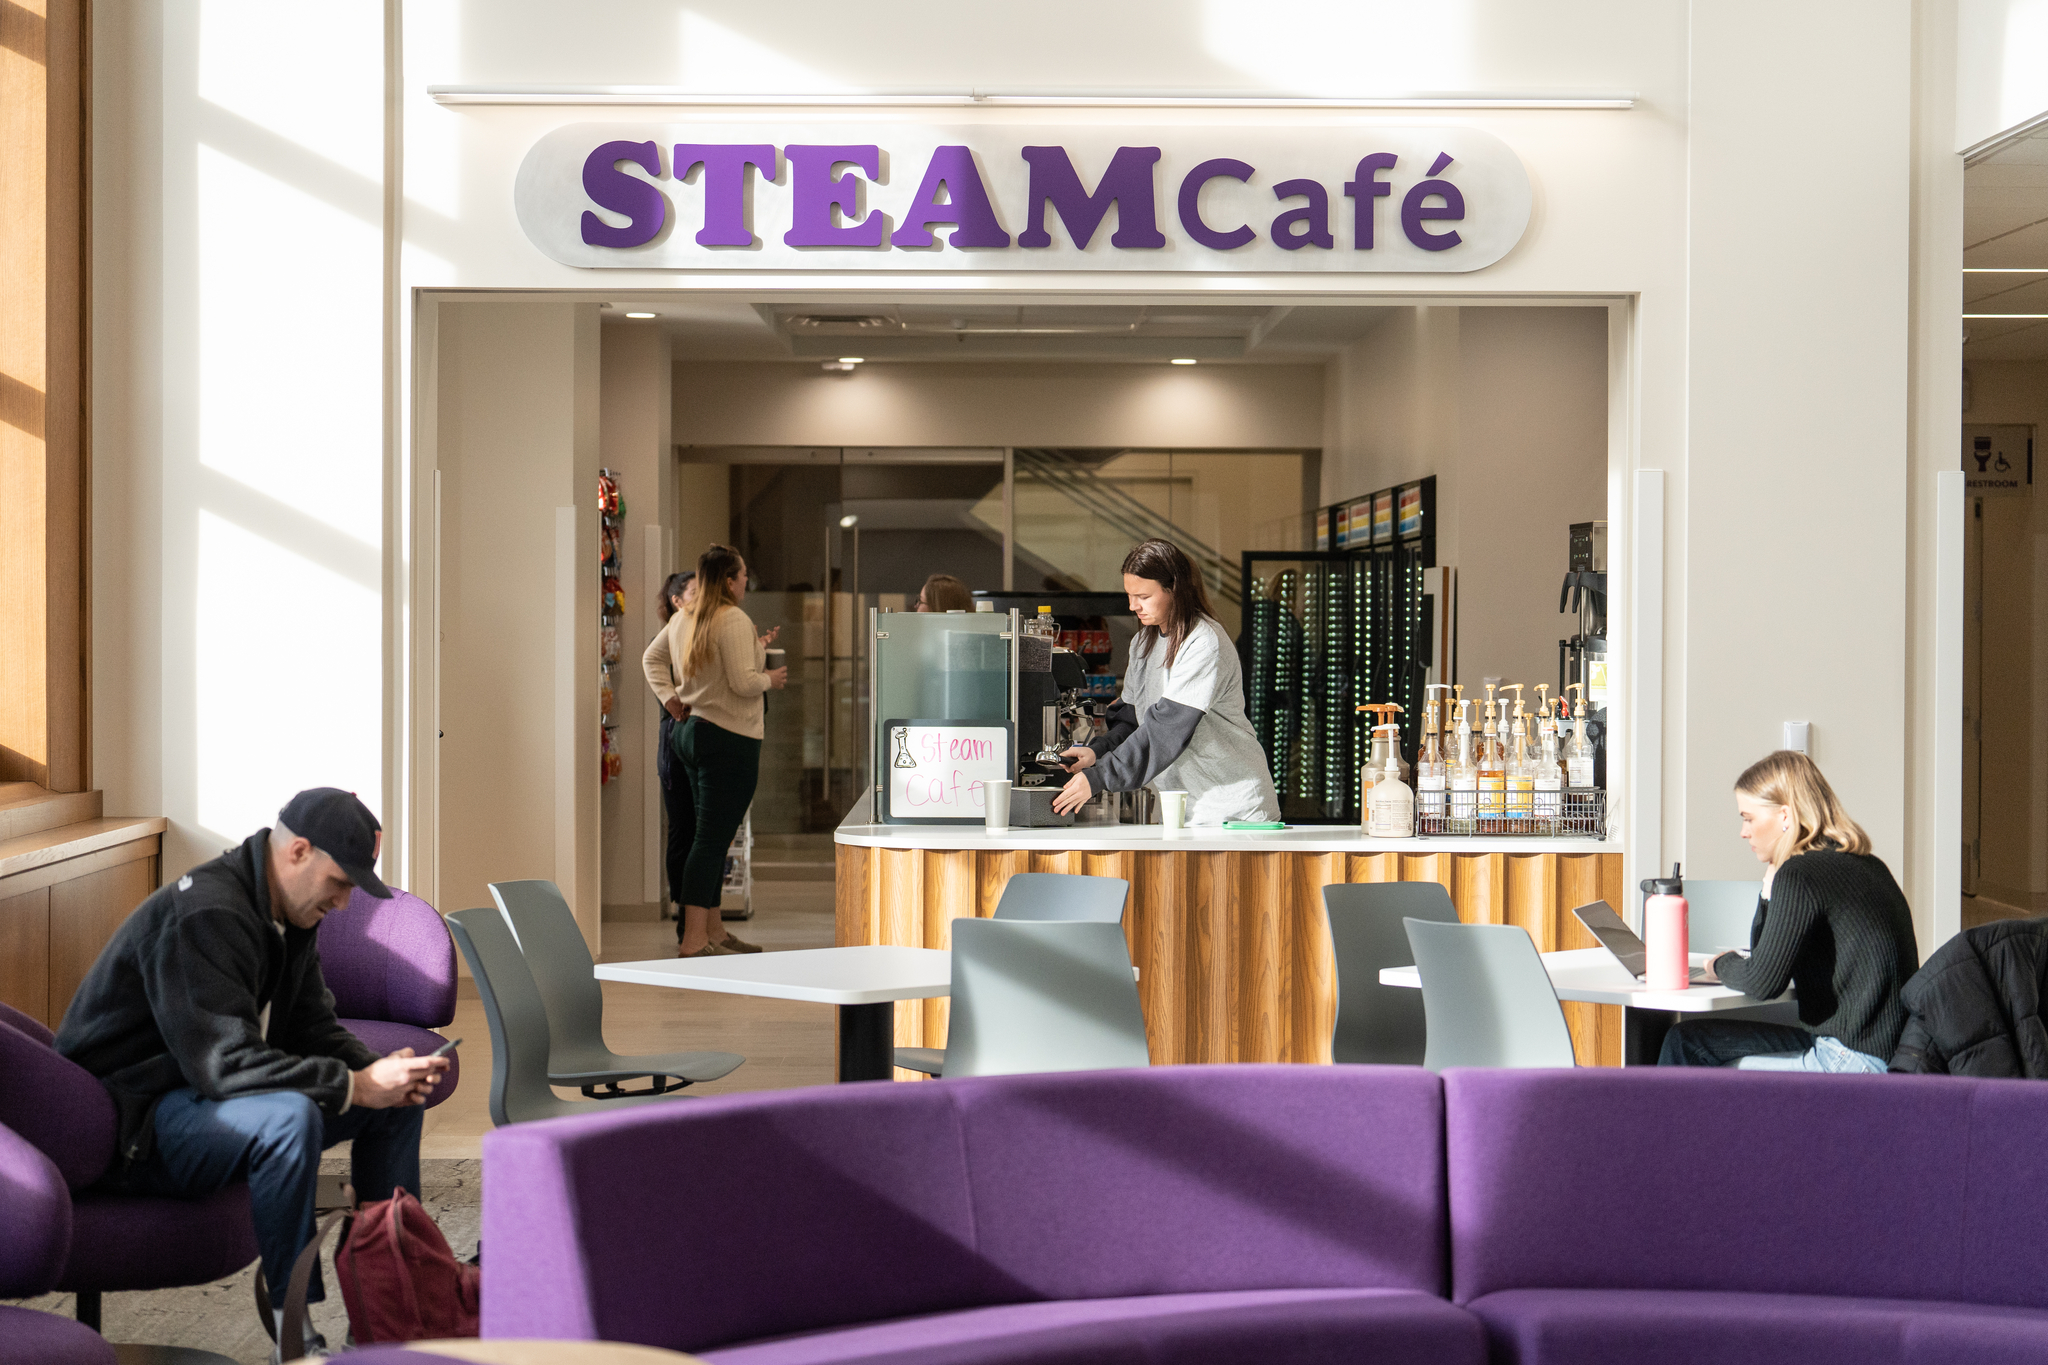 Students studying at the Steam Cafe on a sunny day